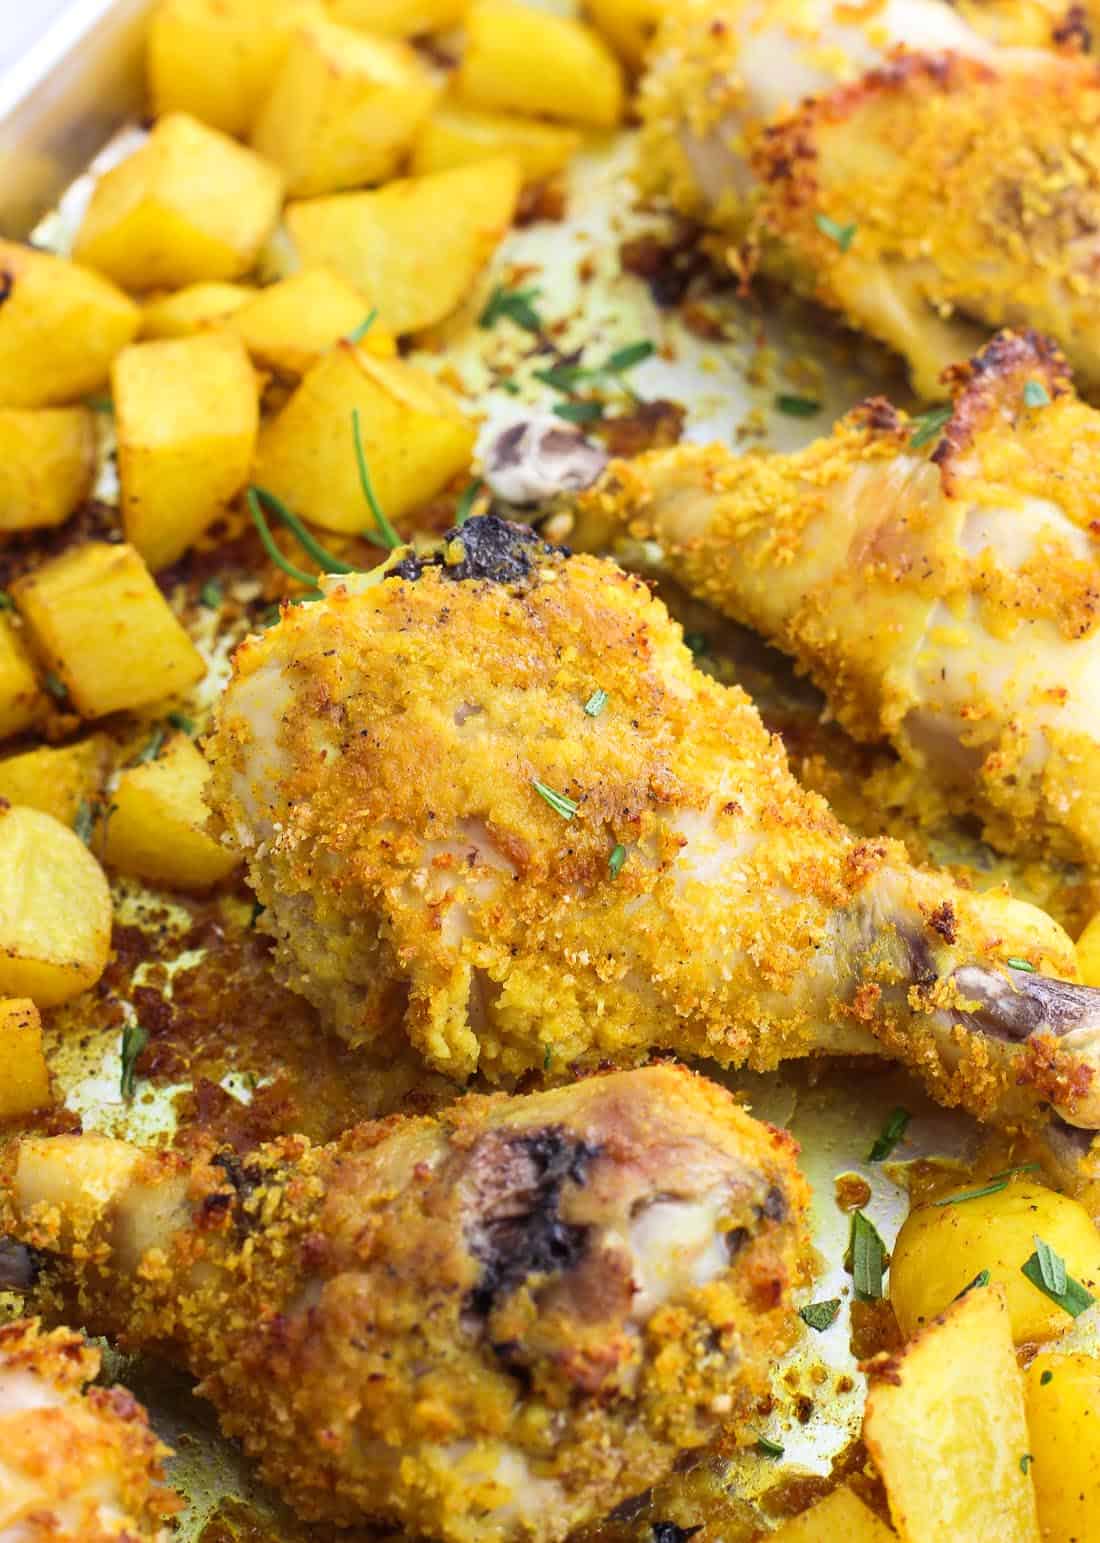 Breadcrumb-coated chicken drumsticks and potato cubes on a metal sheet pan after cooking